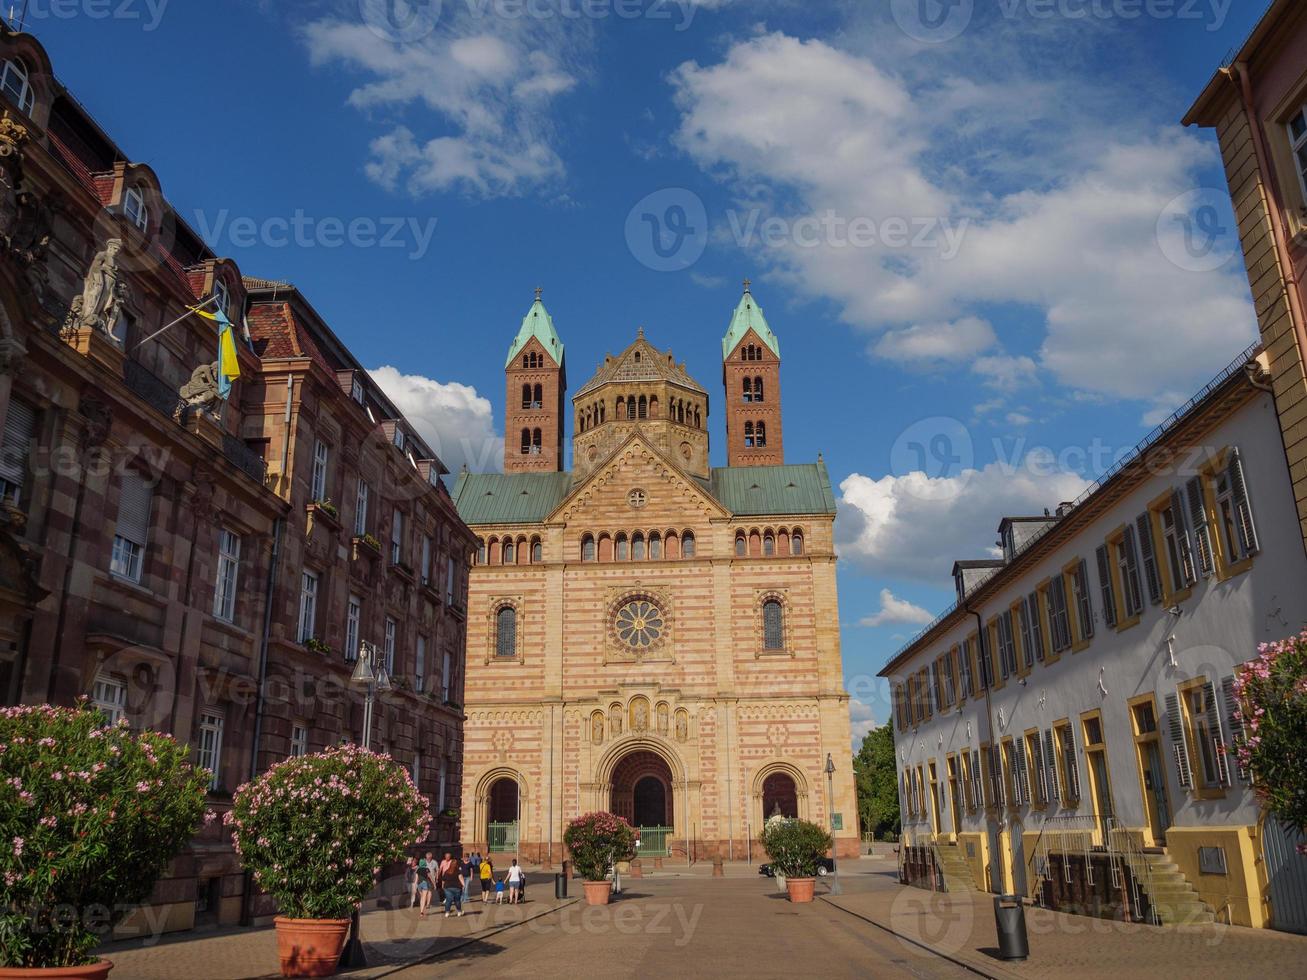 the old city of Speyer in germany photo